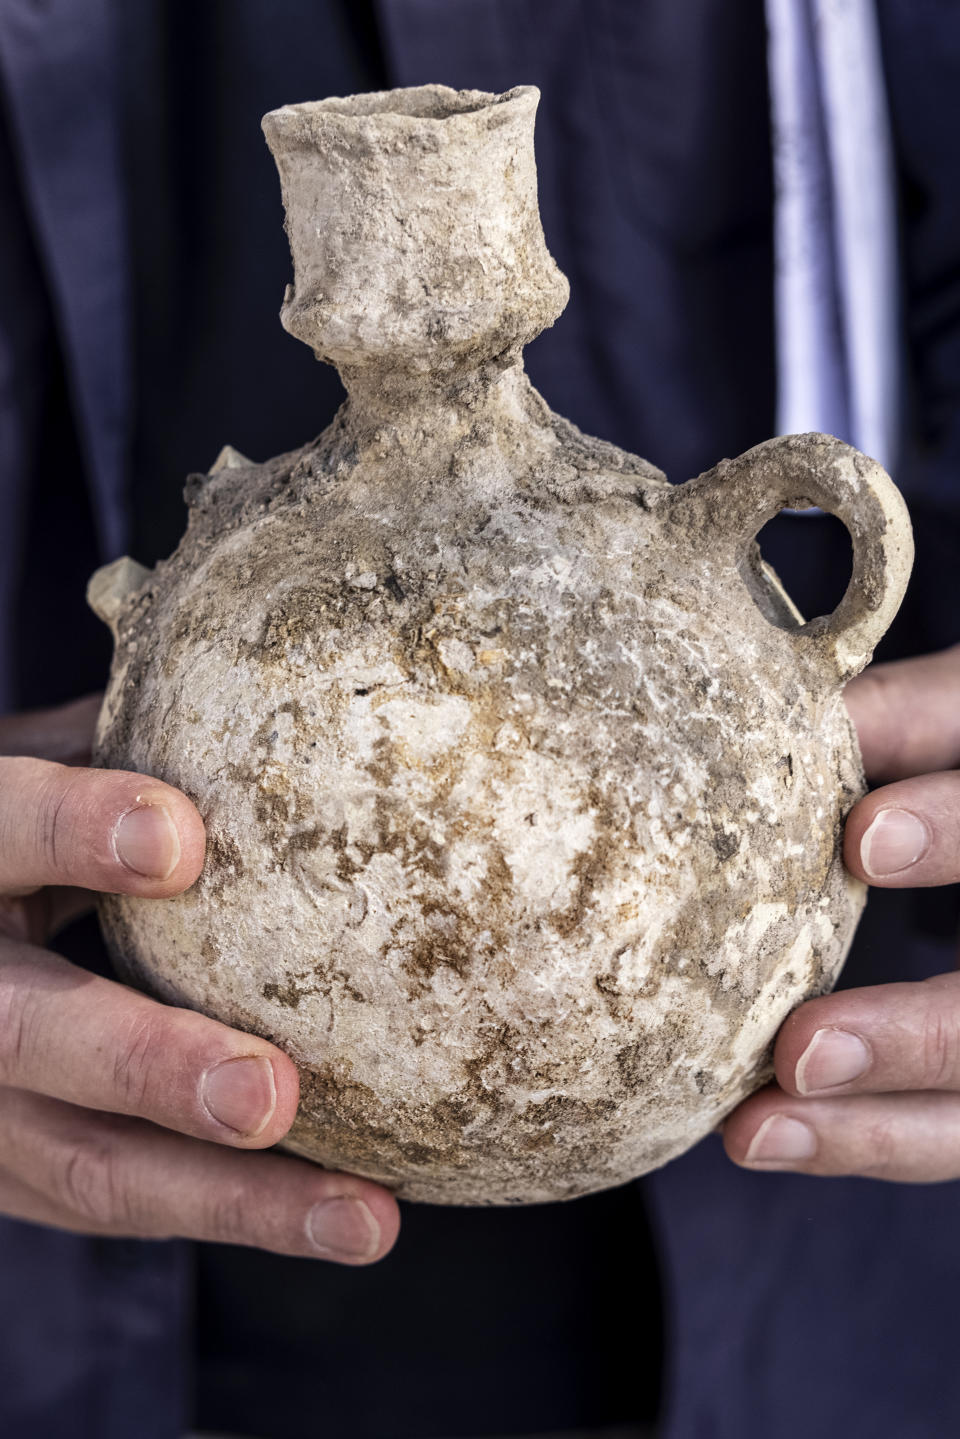 An Israel Antiquities Authority employe holds a jar from a massive ancient winemaking complex dating back some 1,500 years in Yavne, central, Israel, Monday, Oct. 11, 2021. Israeli archaeologists said the complex includes five wine presses, warehouses, kilns for producing clay storage vessels and tens of thousands of fragments and jars. (AP Photo/Tsafrir Abayov)